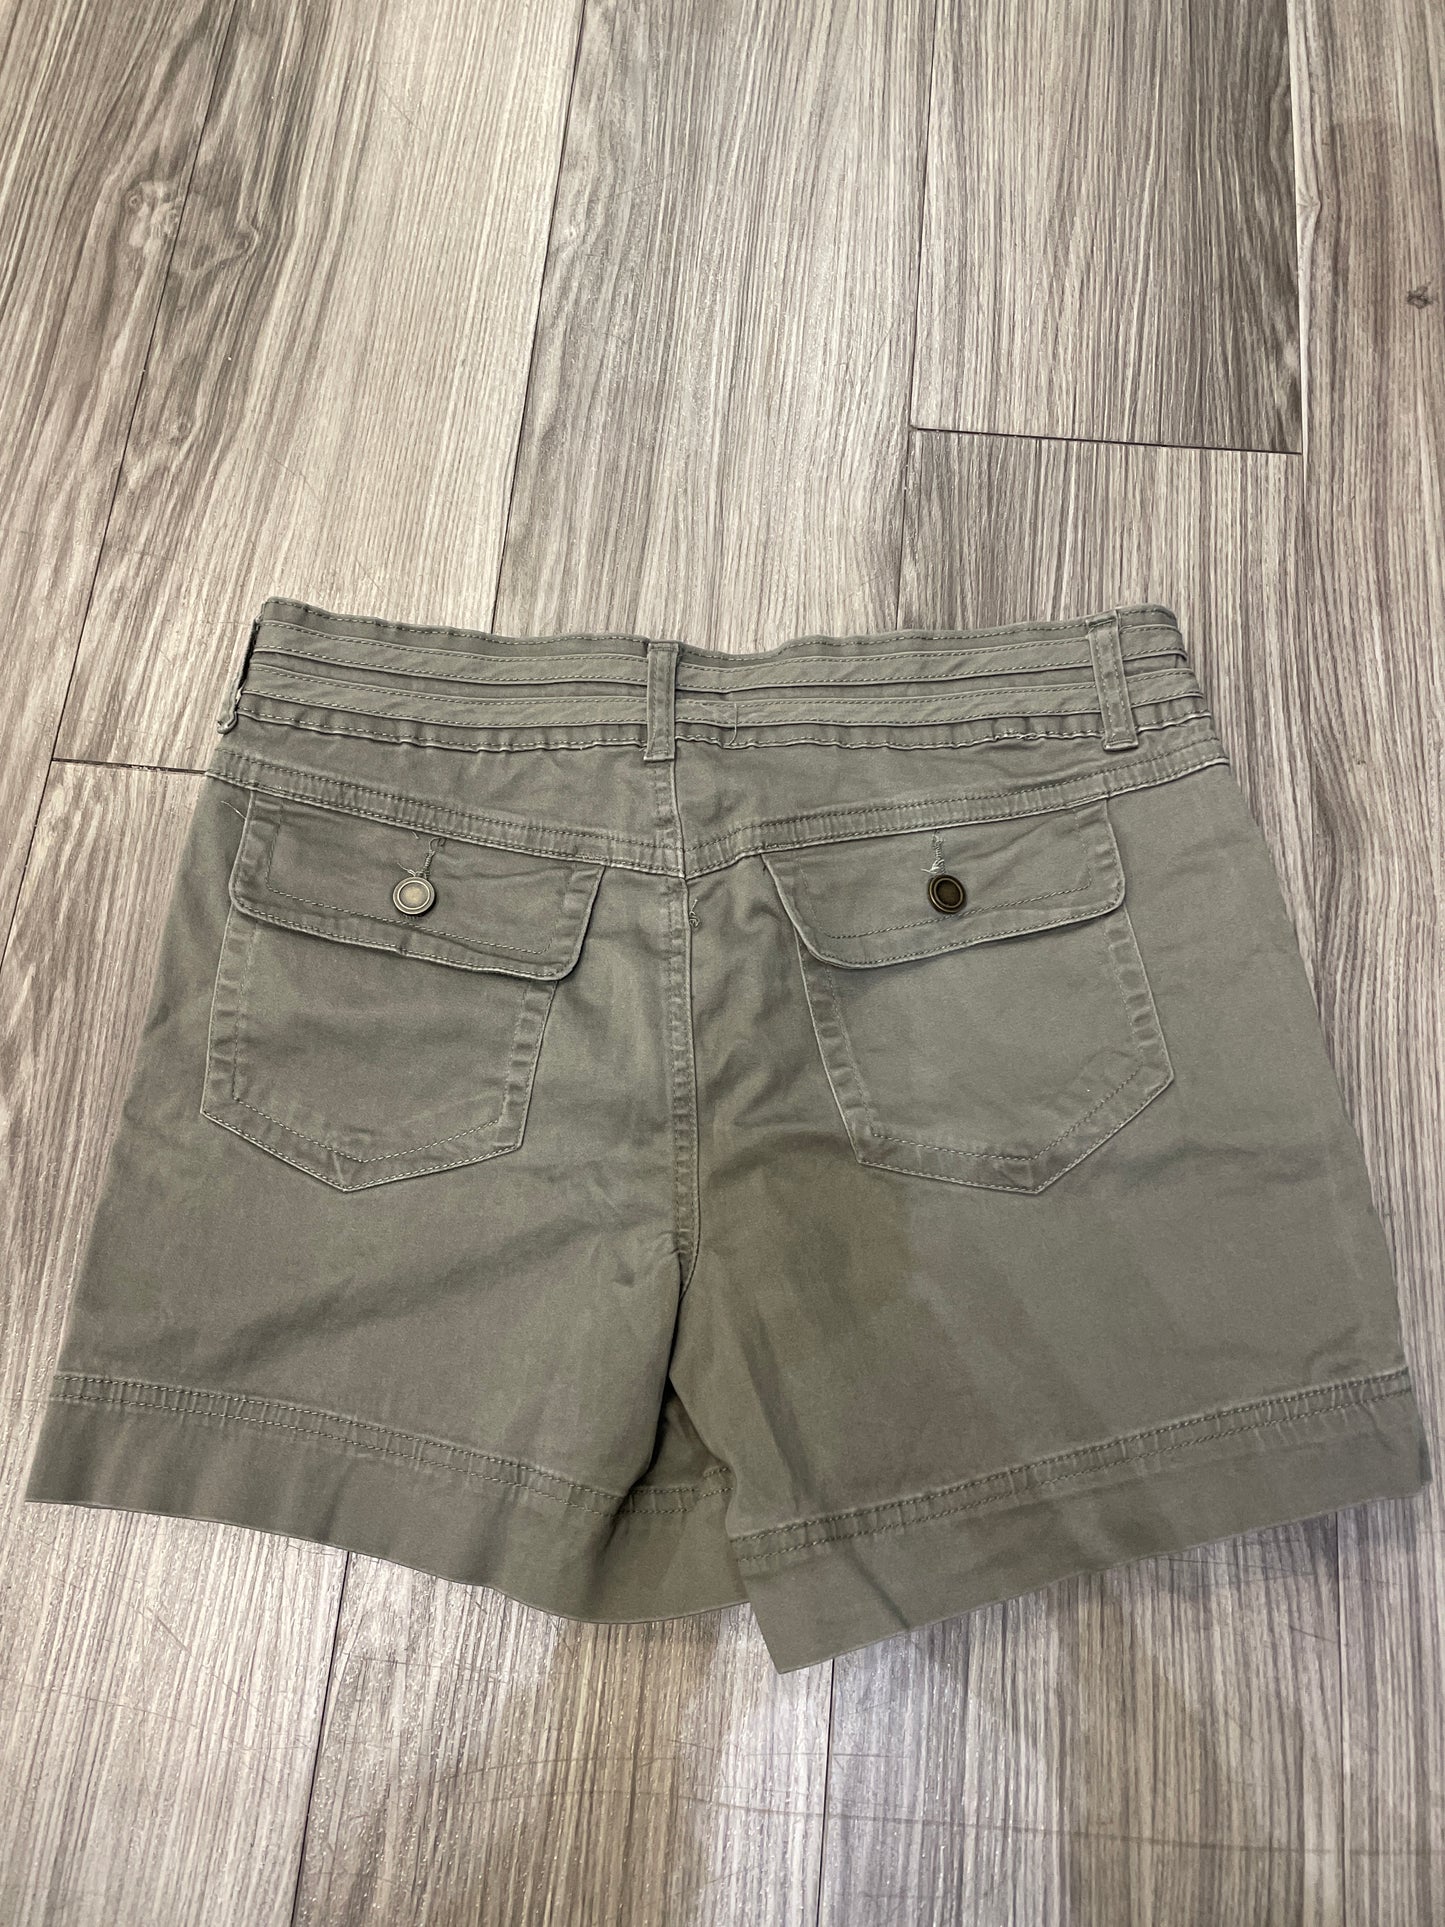 Shorts By One 5 One  Size: 8